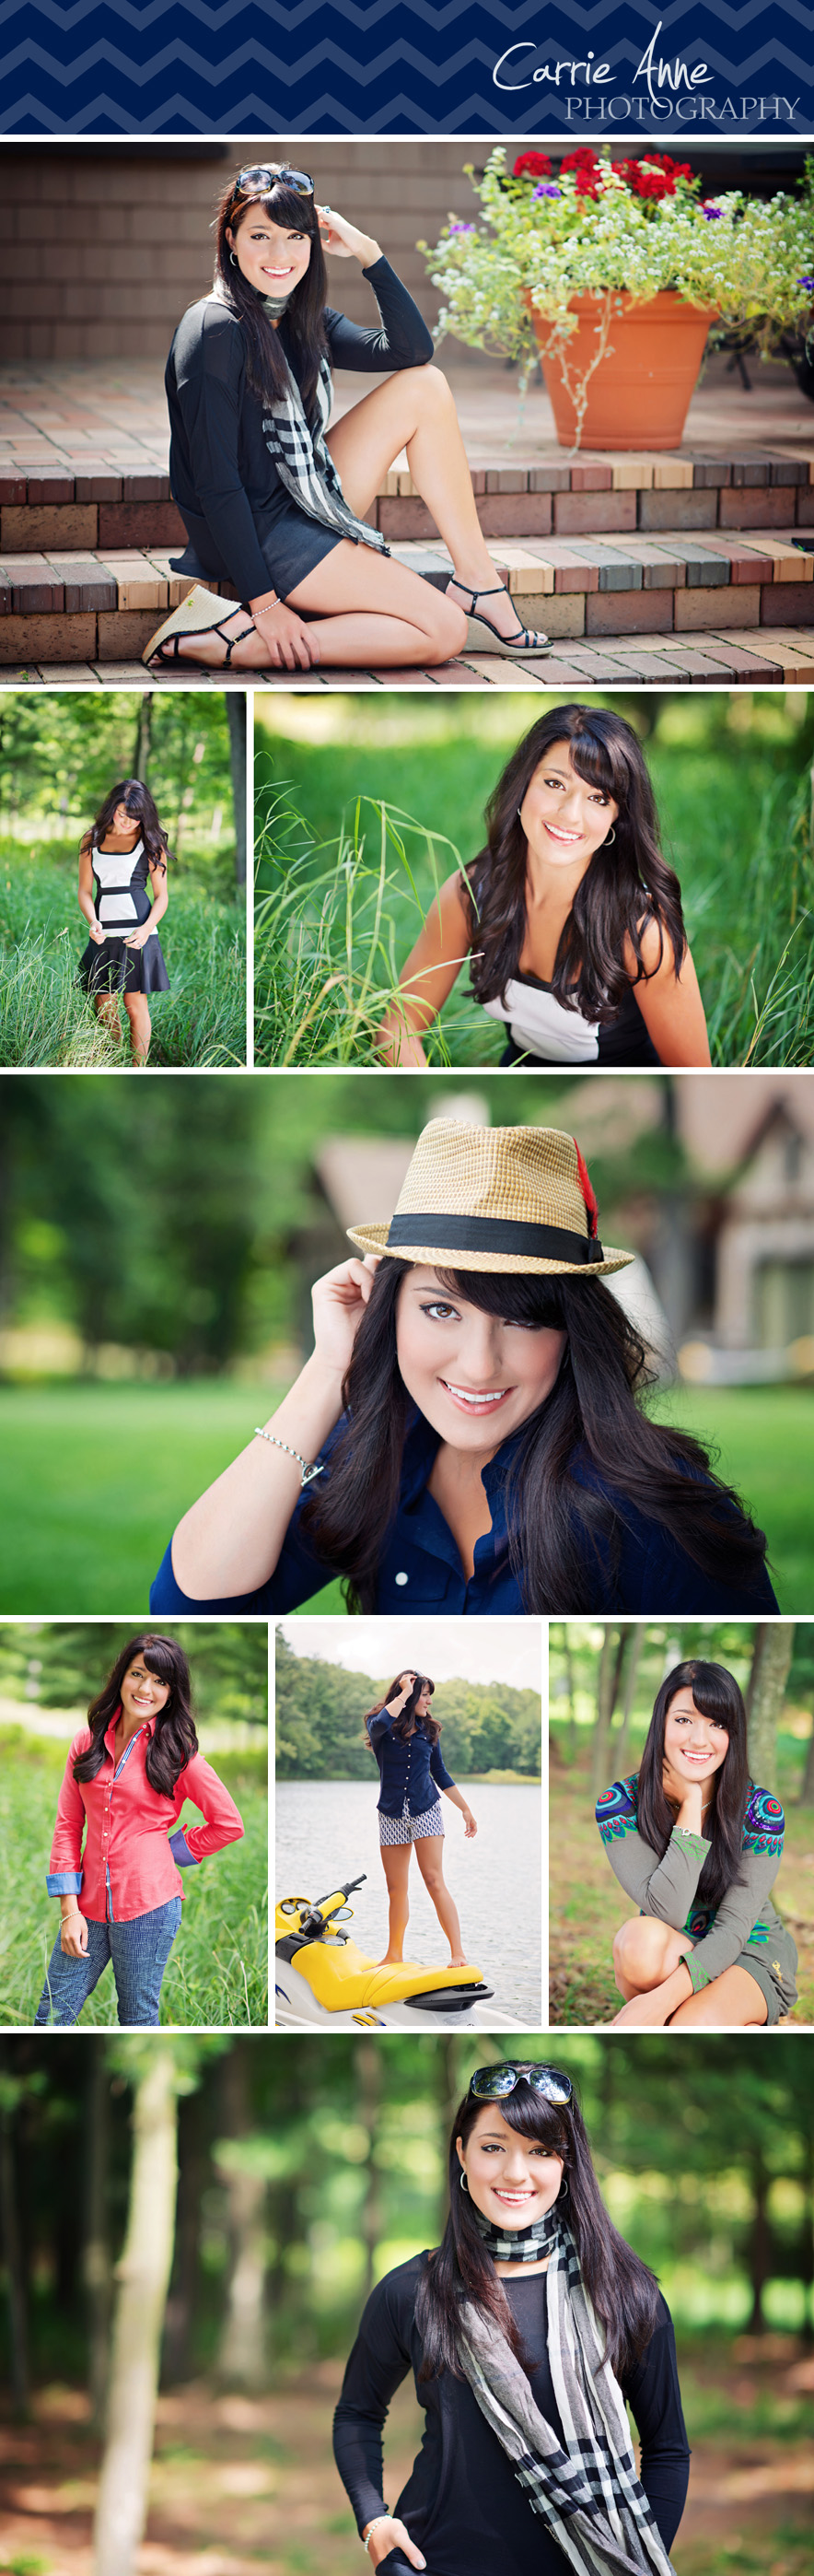 Grand Rapids Senior Photographer-Carrie Anne Photography-Ultimate Session